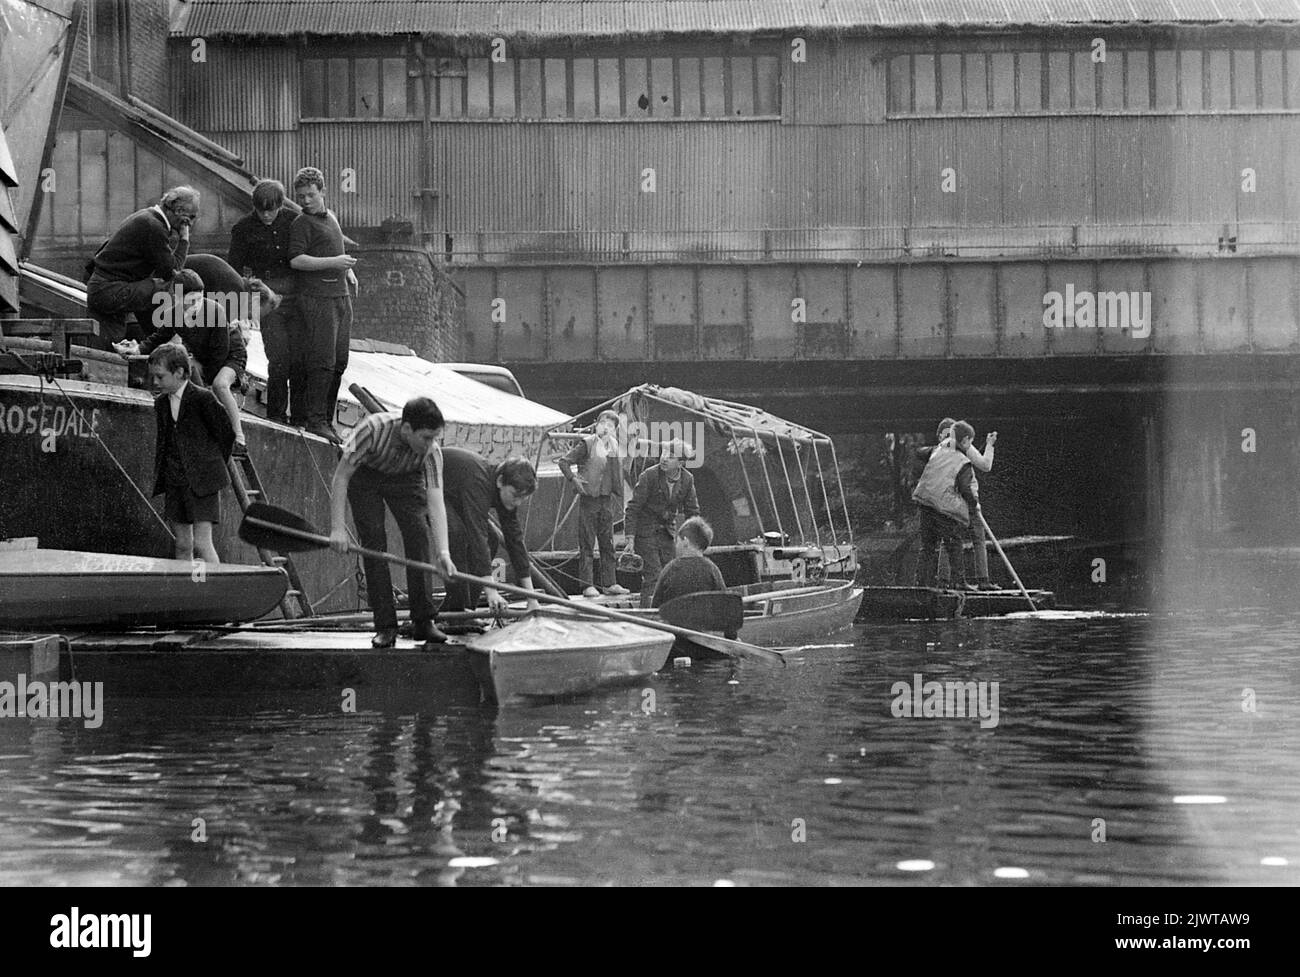 London, England, circa 1967. Two adult volunteers and a group of children  of The Pirate Club aboard 'Rosedale', a disused barge which served as their  clubhouse. Other boys man various boats, rafts